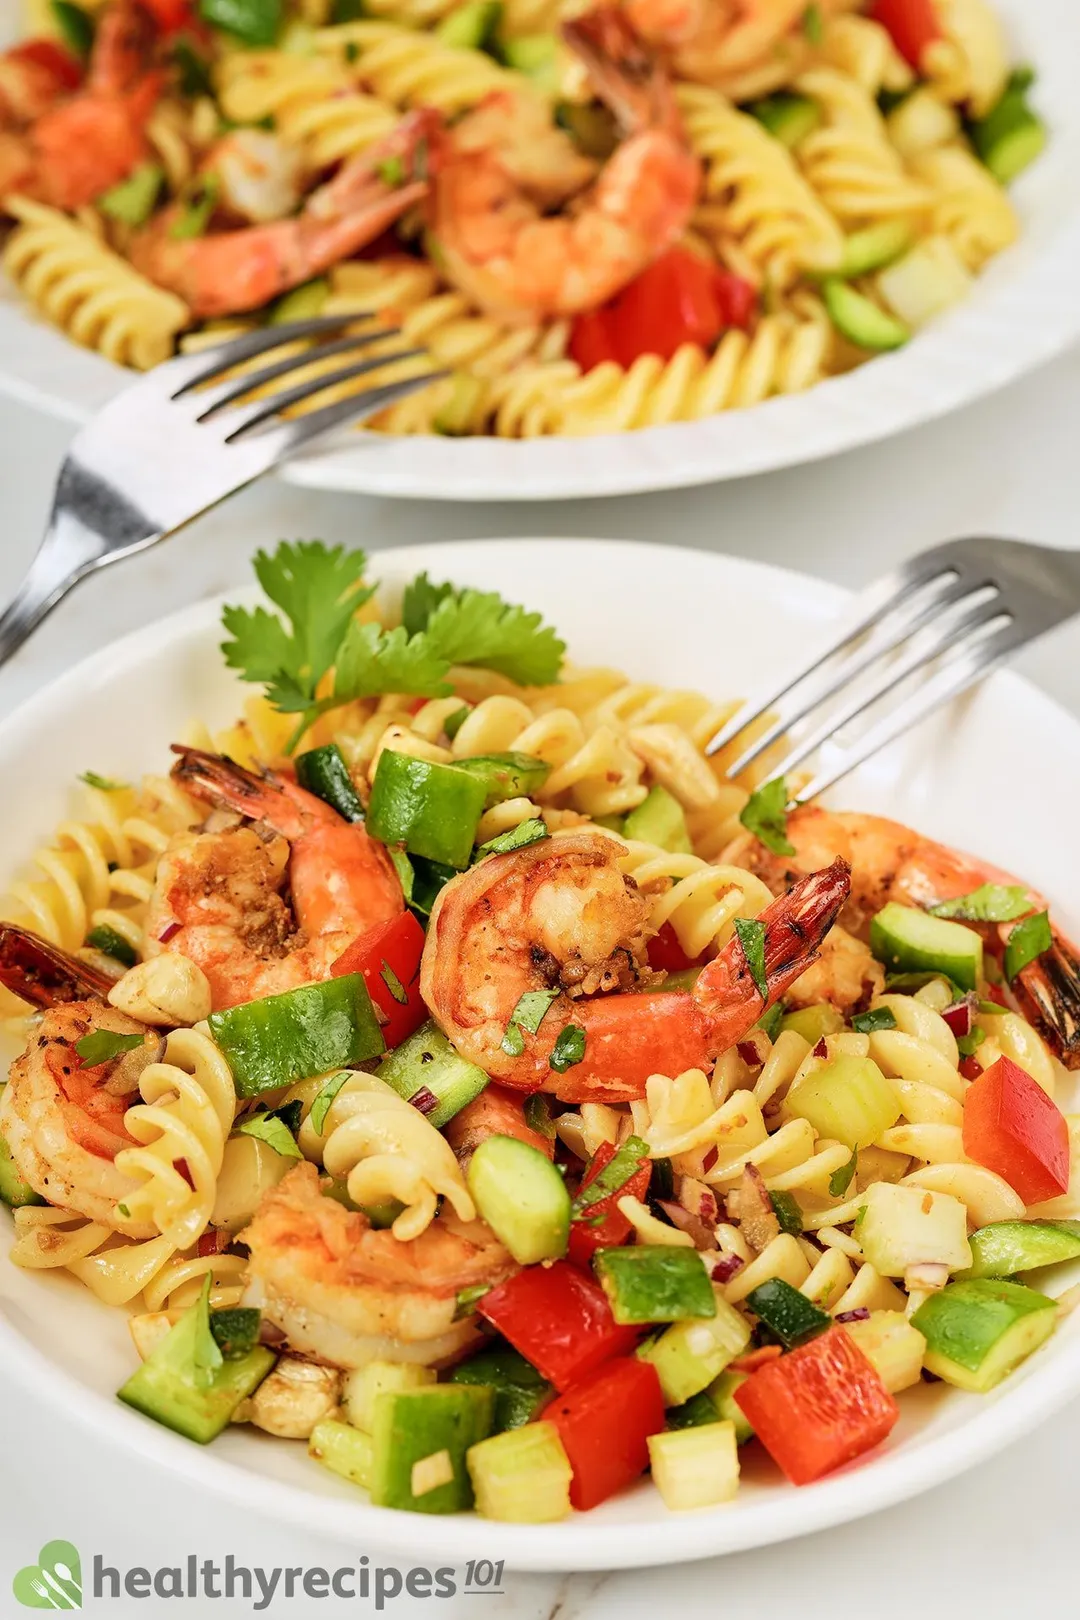 What to Serve with Shrimp Pasta Salad